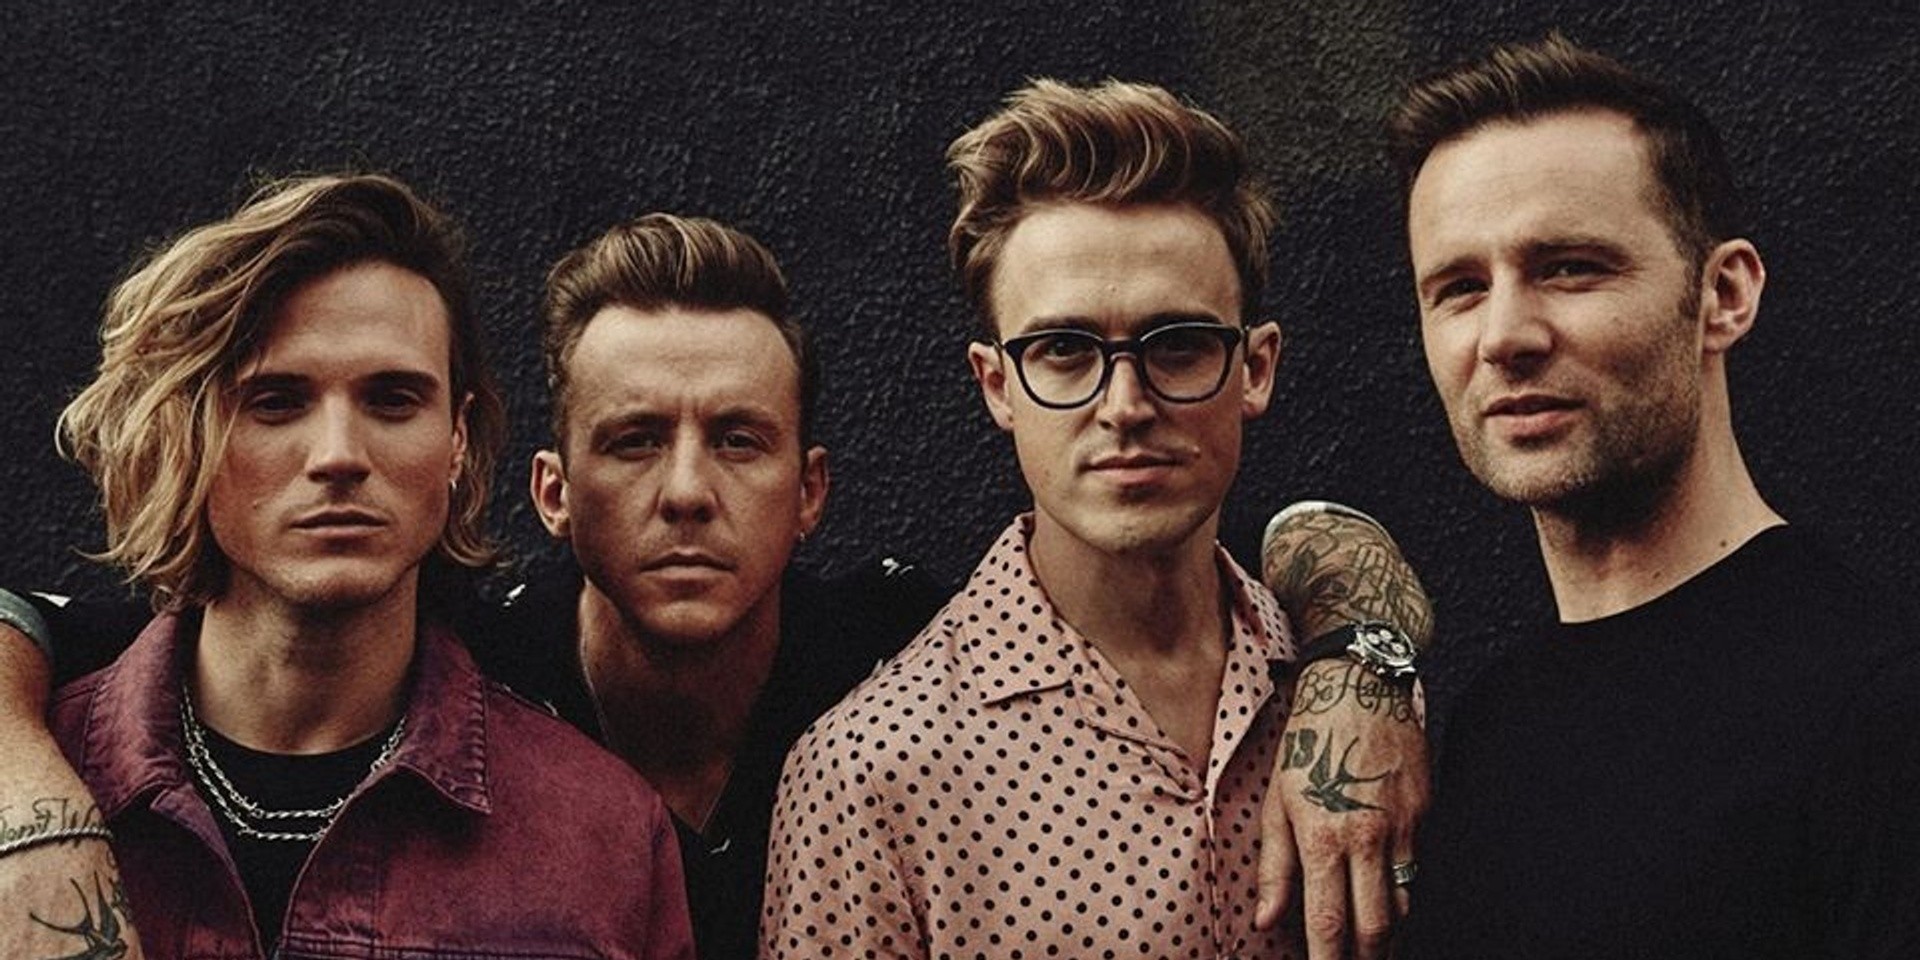 Britpop band McFly sign record deal to release new album after 10 years